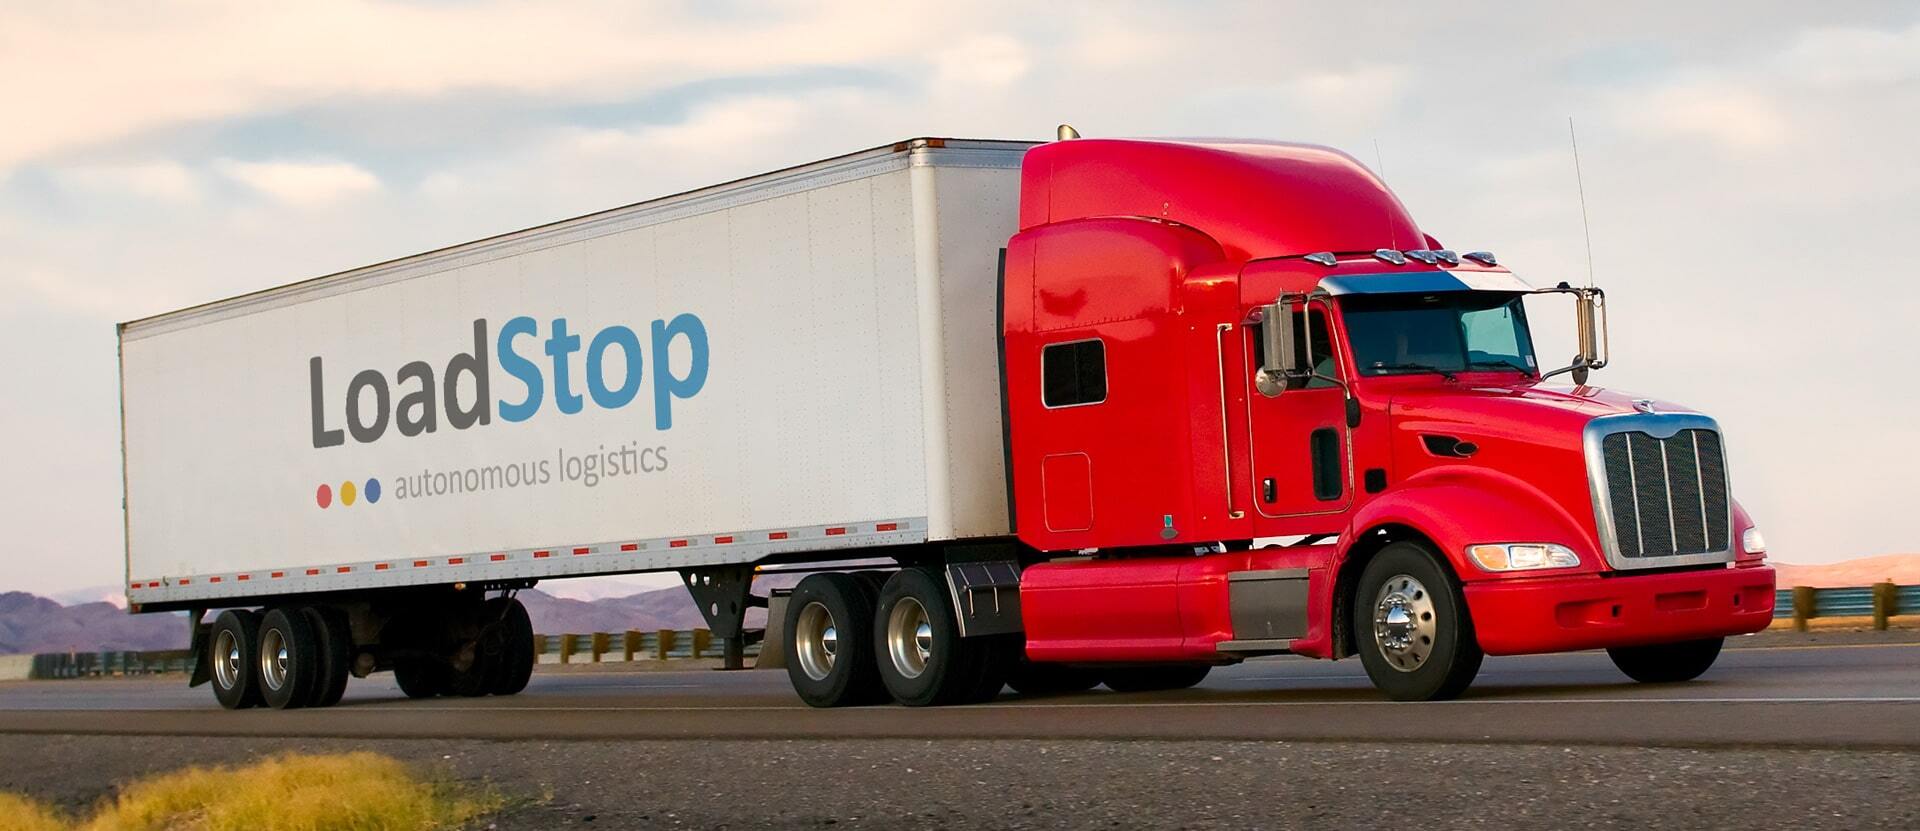 How LoadStop is Adding Value in the Logistics and Trucking Industry?